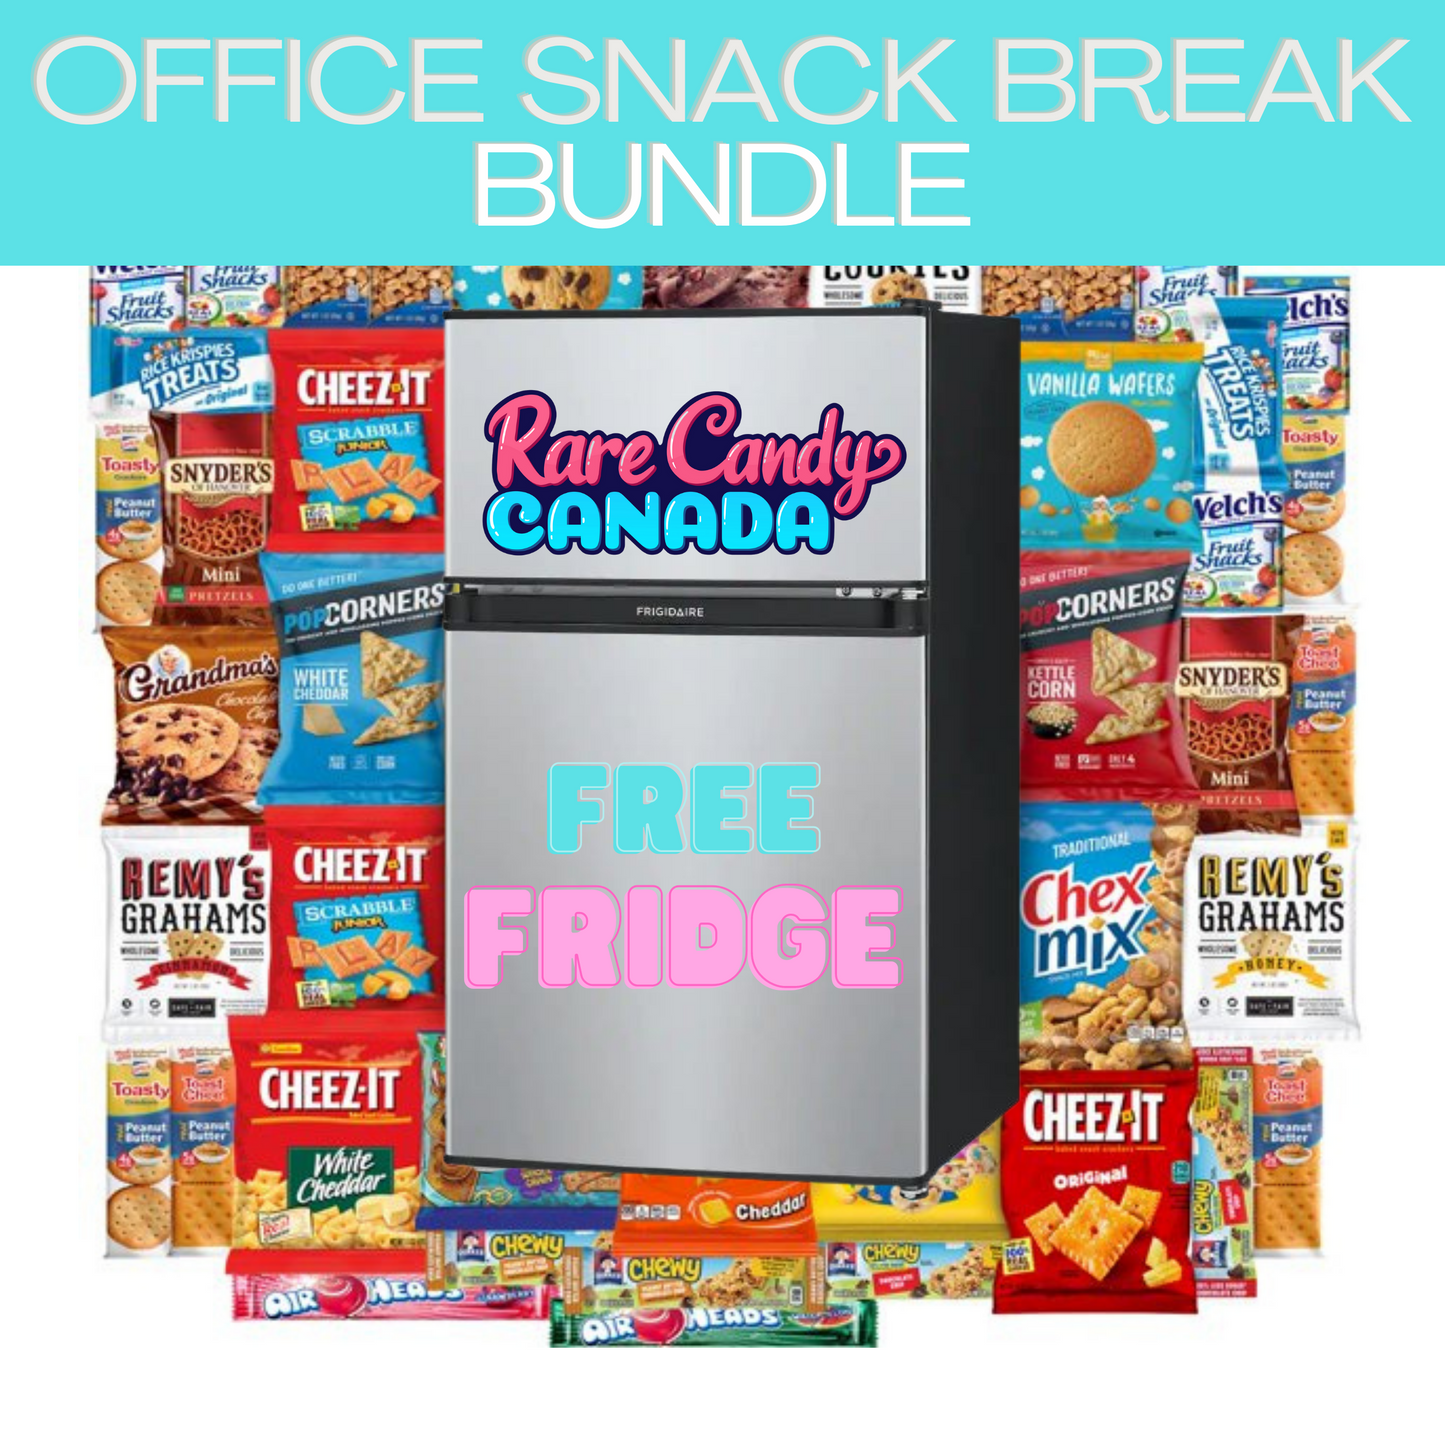 Office Snack Bundle - Complete Candy, Chocolate, Drinks, Chips & More - Exotic & Rare